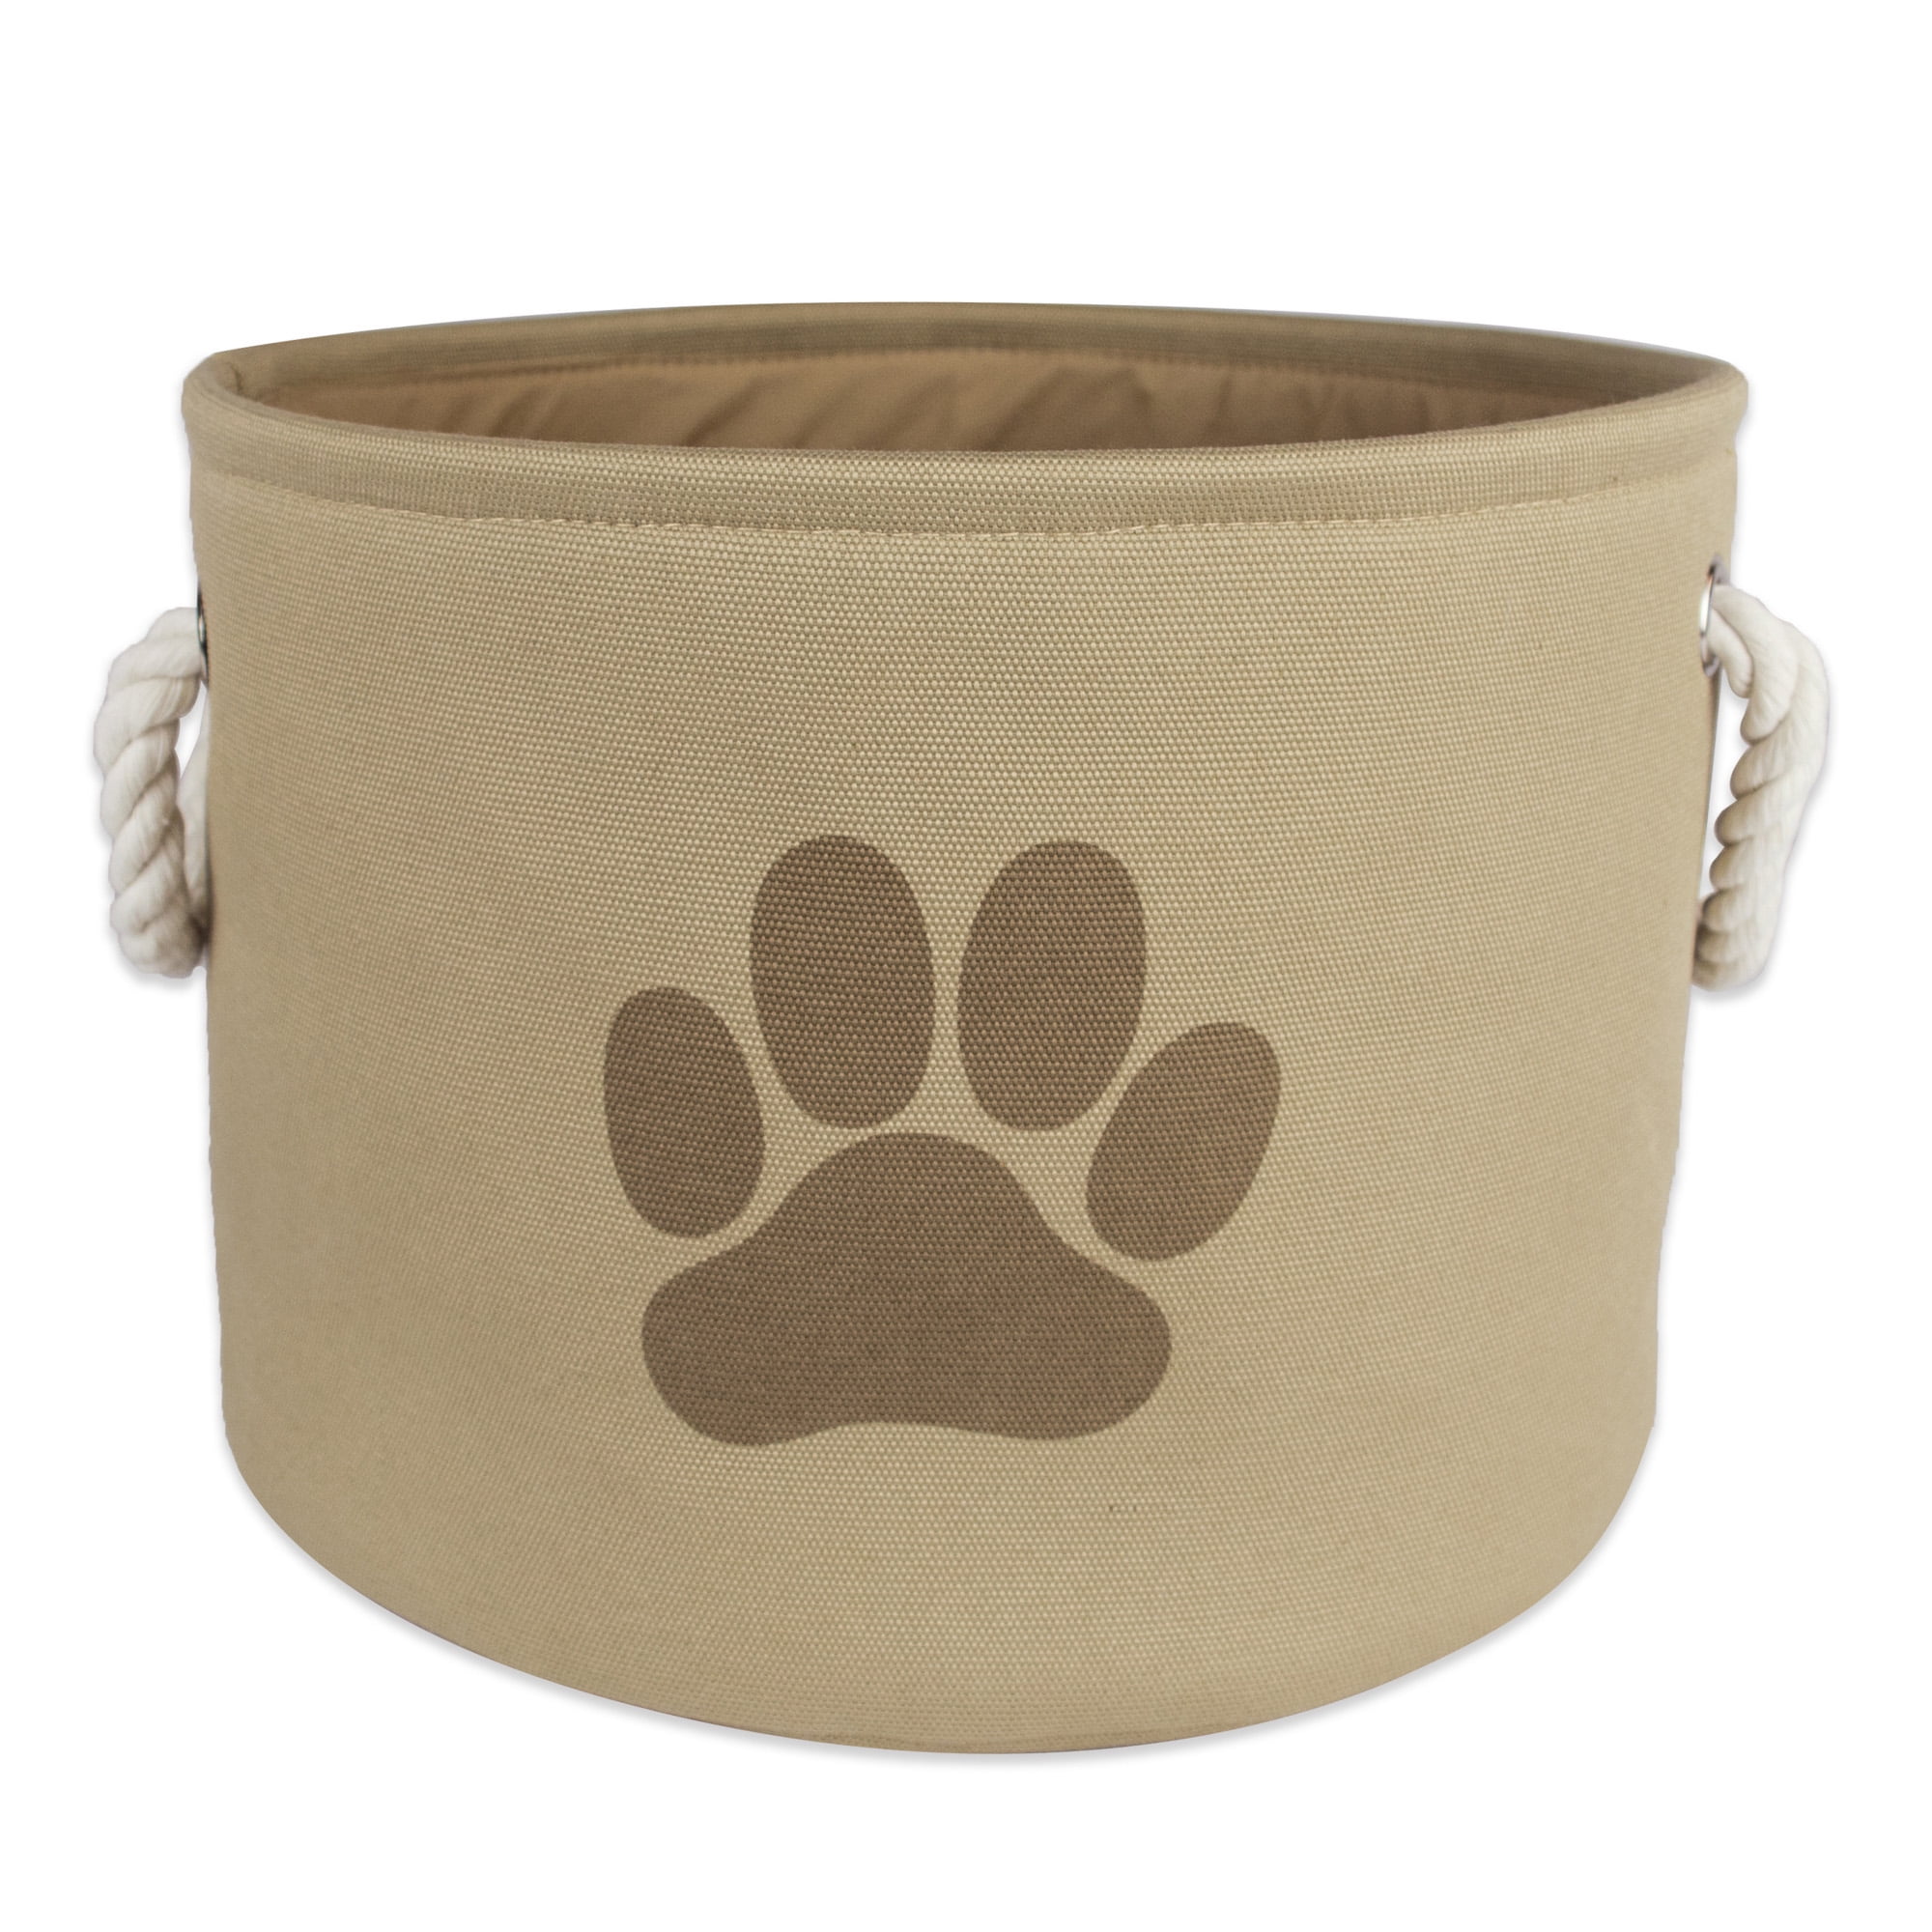 Design Imports Camz36089 9 X 12 X 12 In. Polyester Round Pet Bin Paw, Taupe - Small